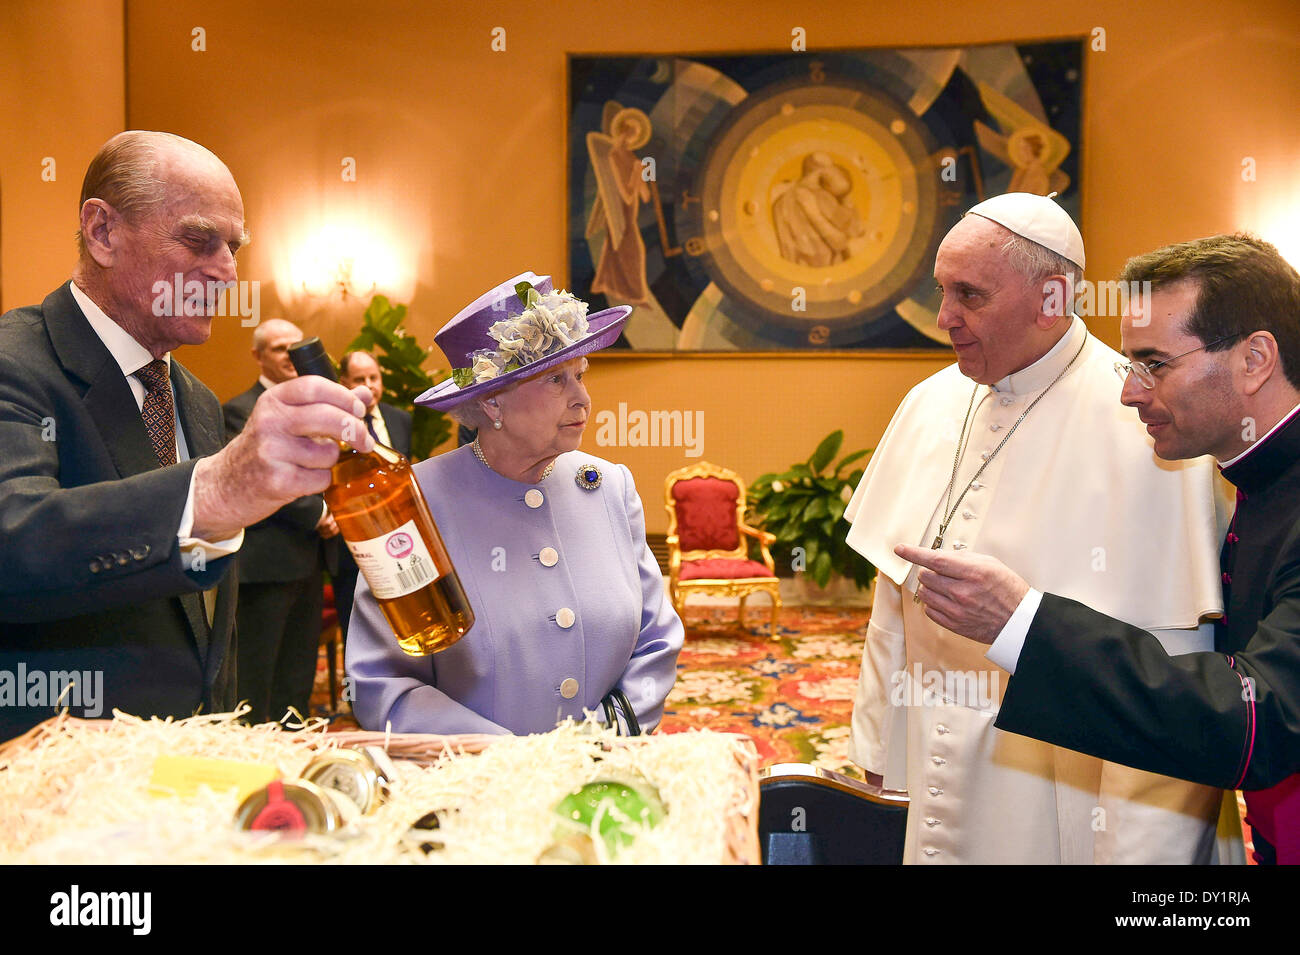 Vatican, Rome. 3rd April 2014.  Vatican City  Paul VI Hall private study,  The Holy Father Francis Pope meets the Queen of the United Kingdom Elizabeth II of England, accompanied by Prince Philip Credit:  Realy Easy Star/Alamy Live News Stock Photo